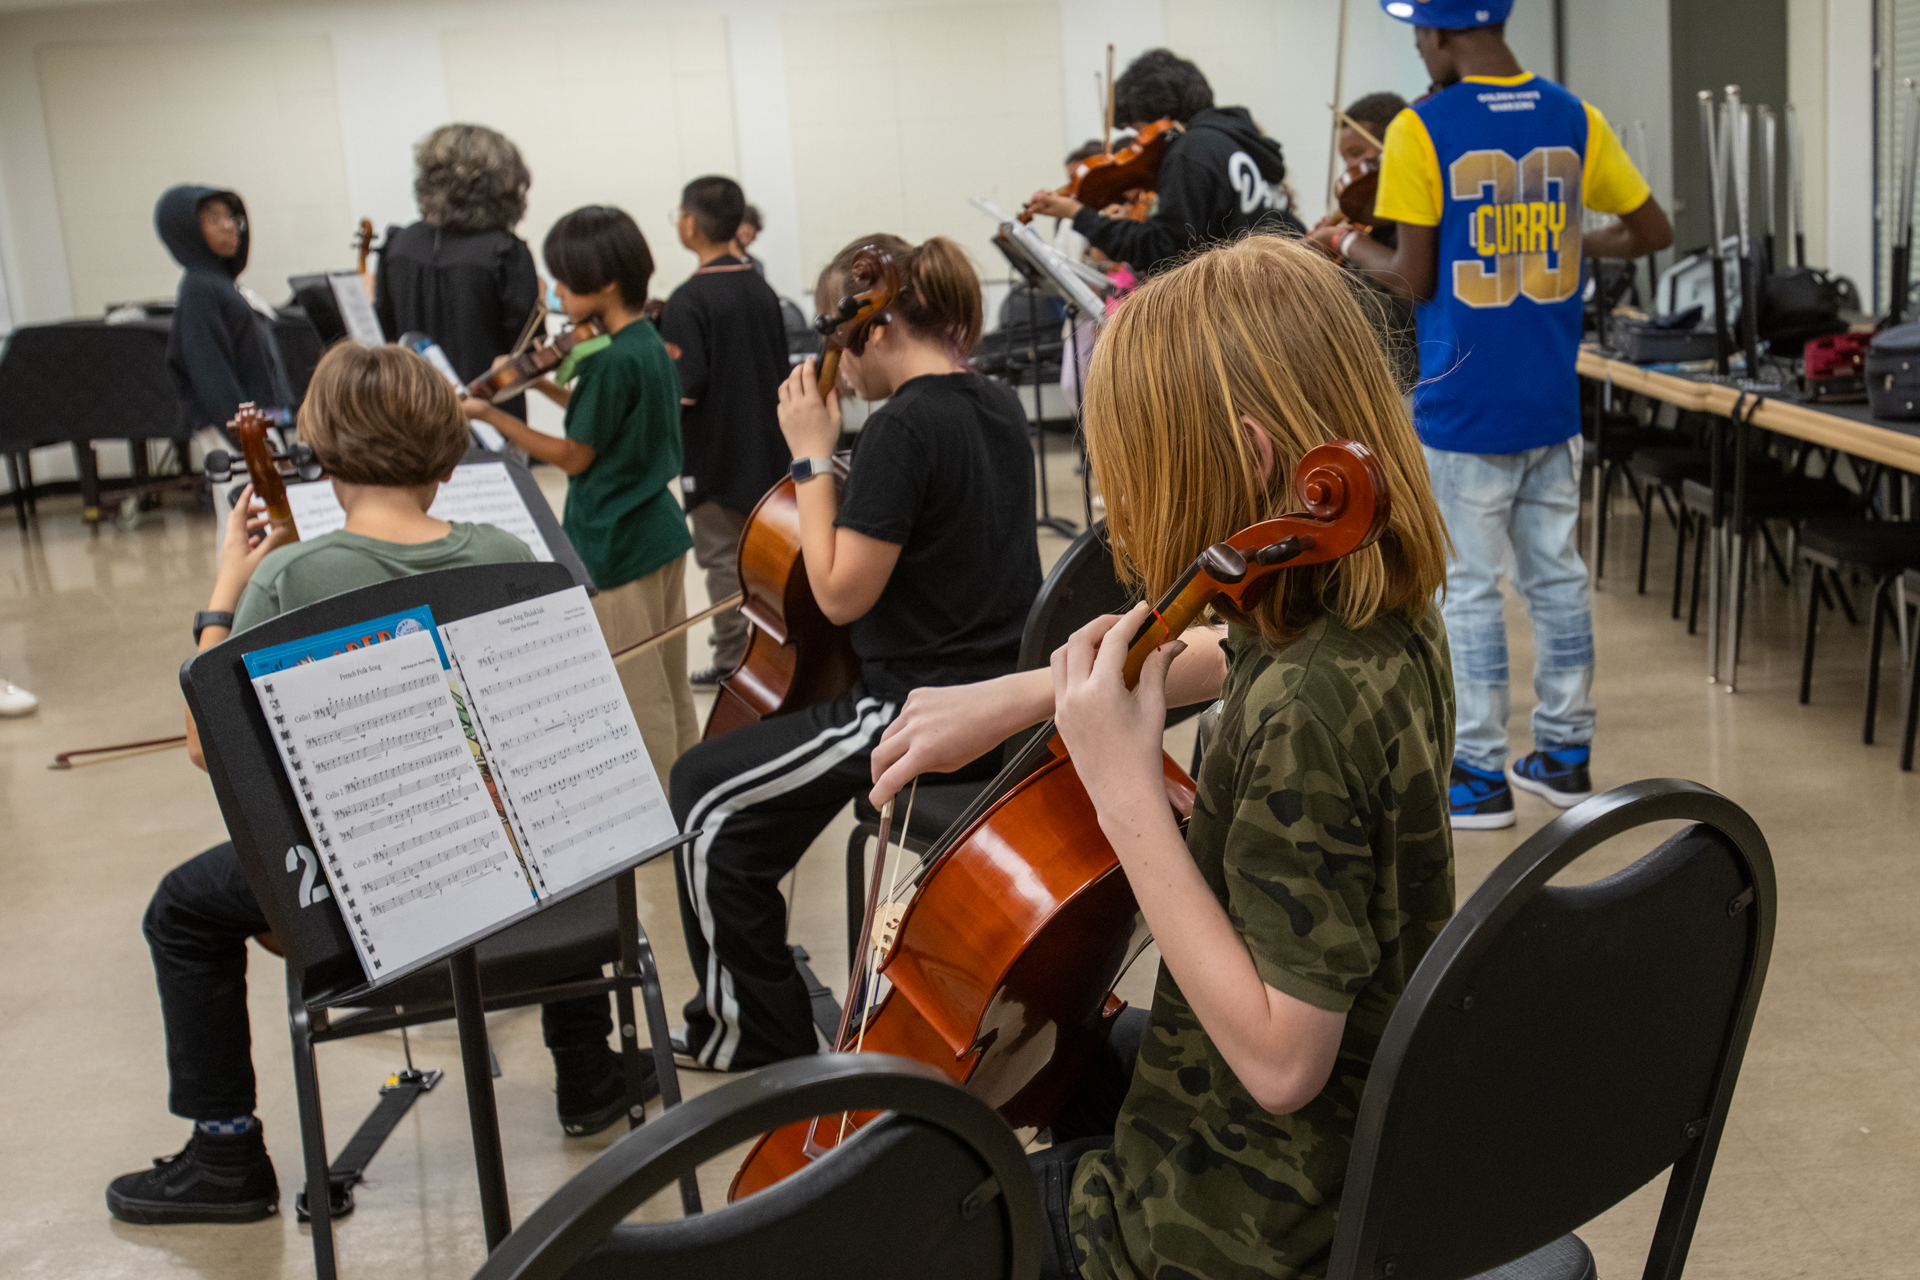 K-12 participants in the Sac State String Project practice on instruments in a campus music classroom.